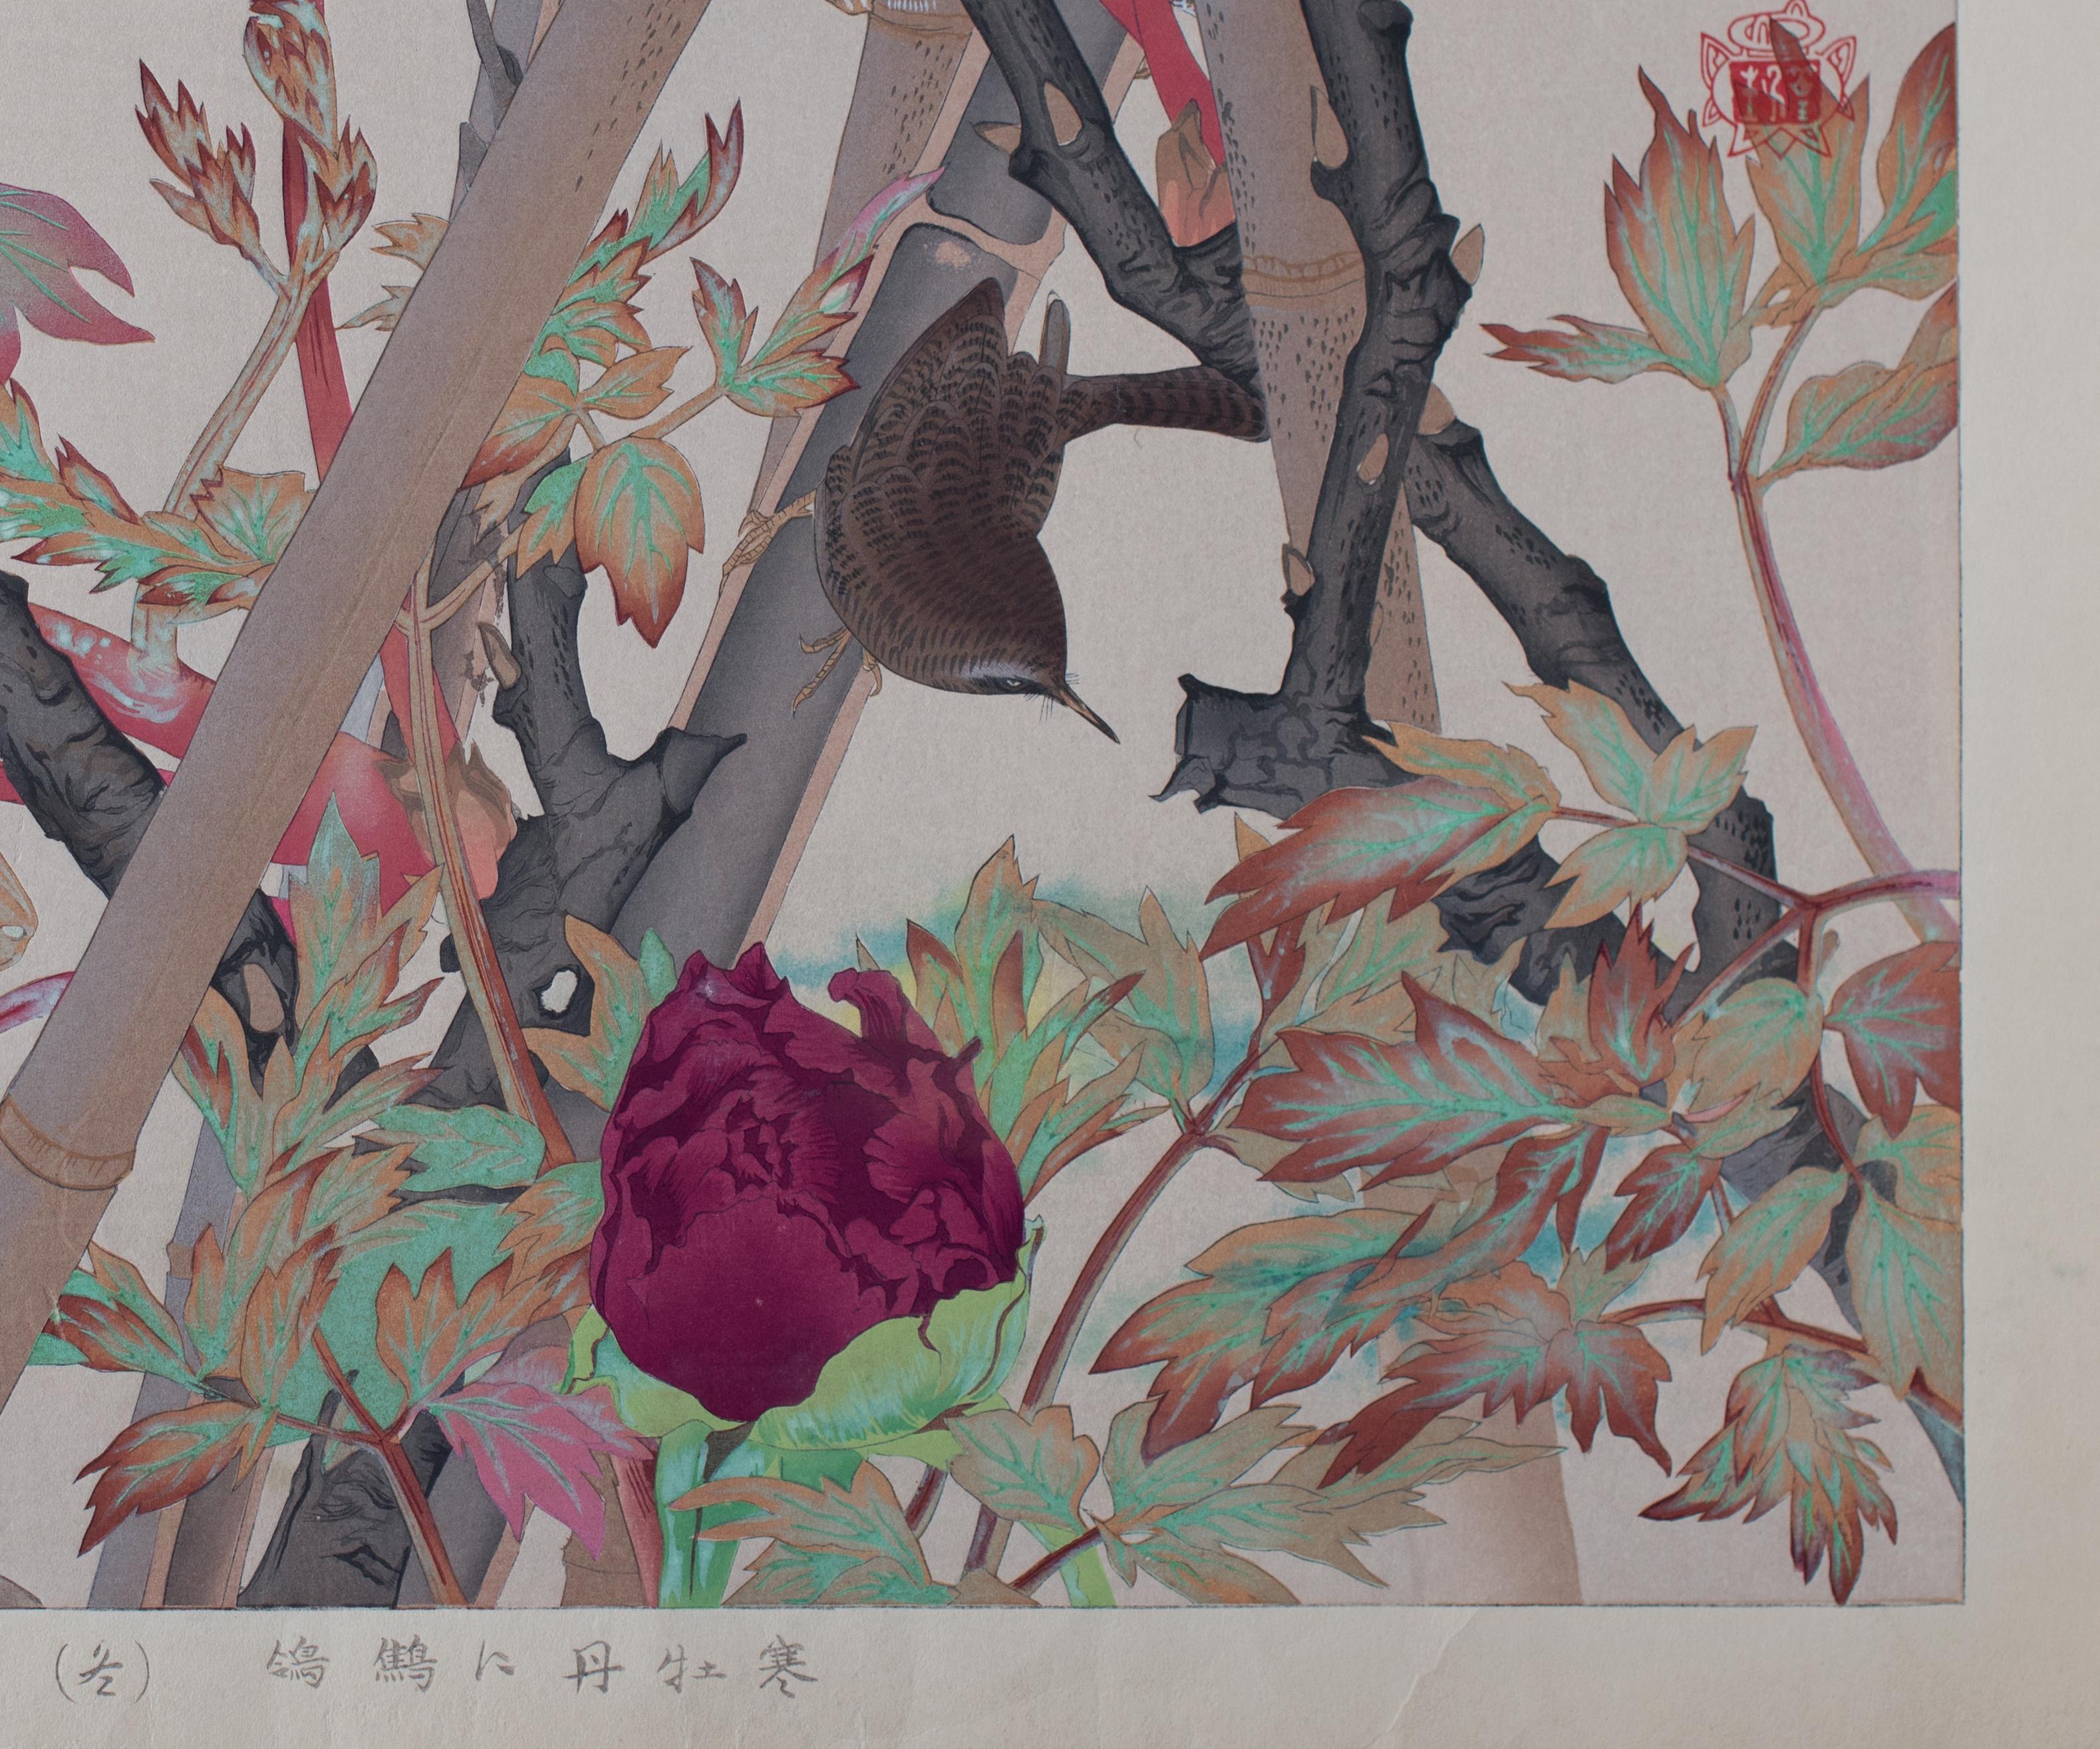 Winter-blooming Tree-Peony and Winter Wren. Number 11 in Rakusan’s finest bird-and-flower series. The Japanese title may be translated “Winter-blooming Tree-peonies and Wren (Winter)” {Kan botan ni misosazai (fuyu)}. A sophisticated composition, we